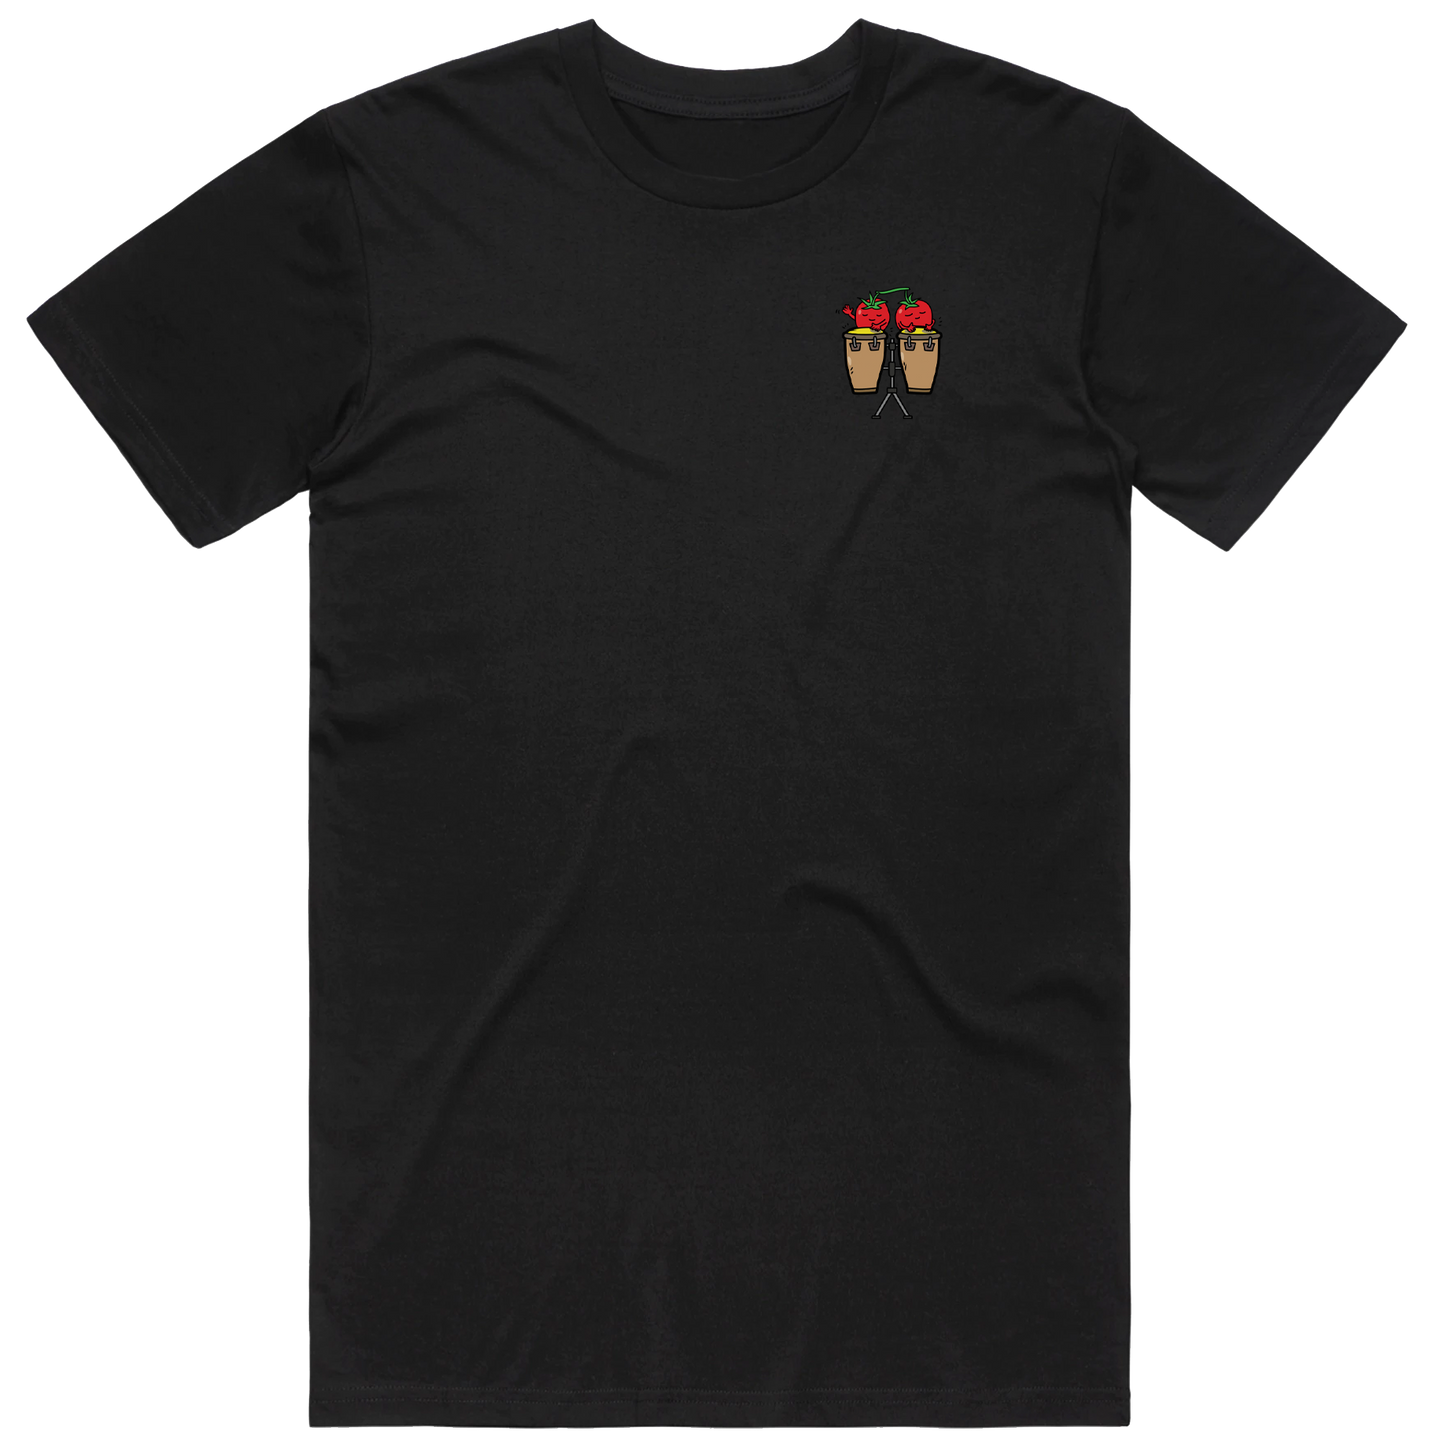 The Official Fina'denne' Band T-Shirt - Black